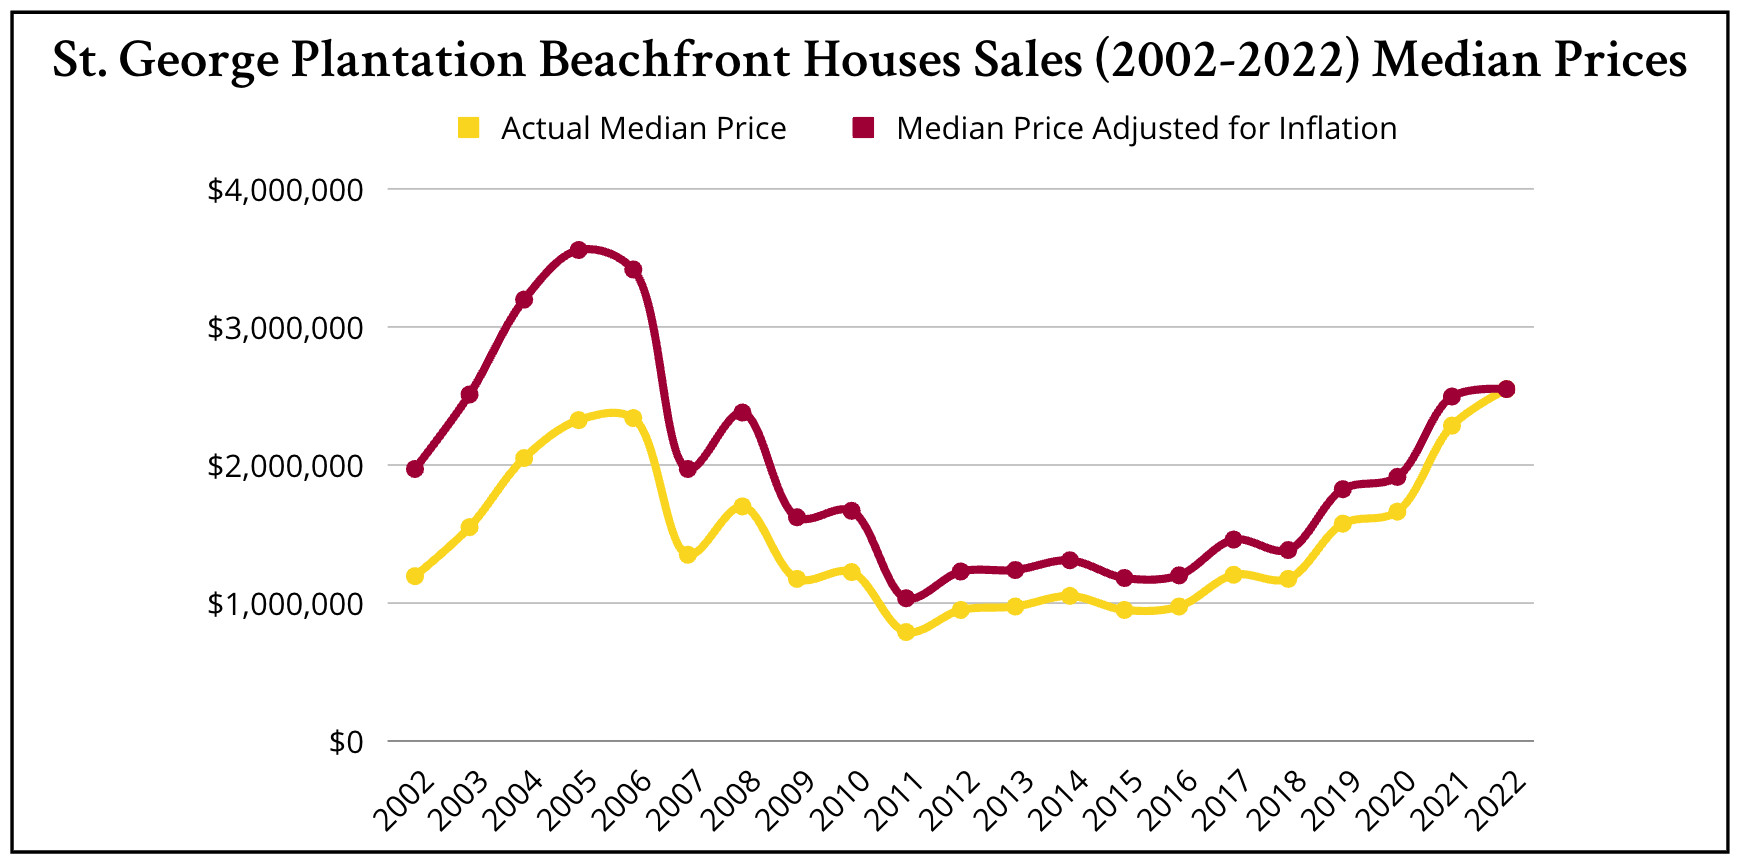 A 20-Year Price History of the Plantation Beachfront Homes Market - chart